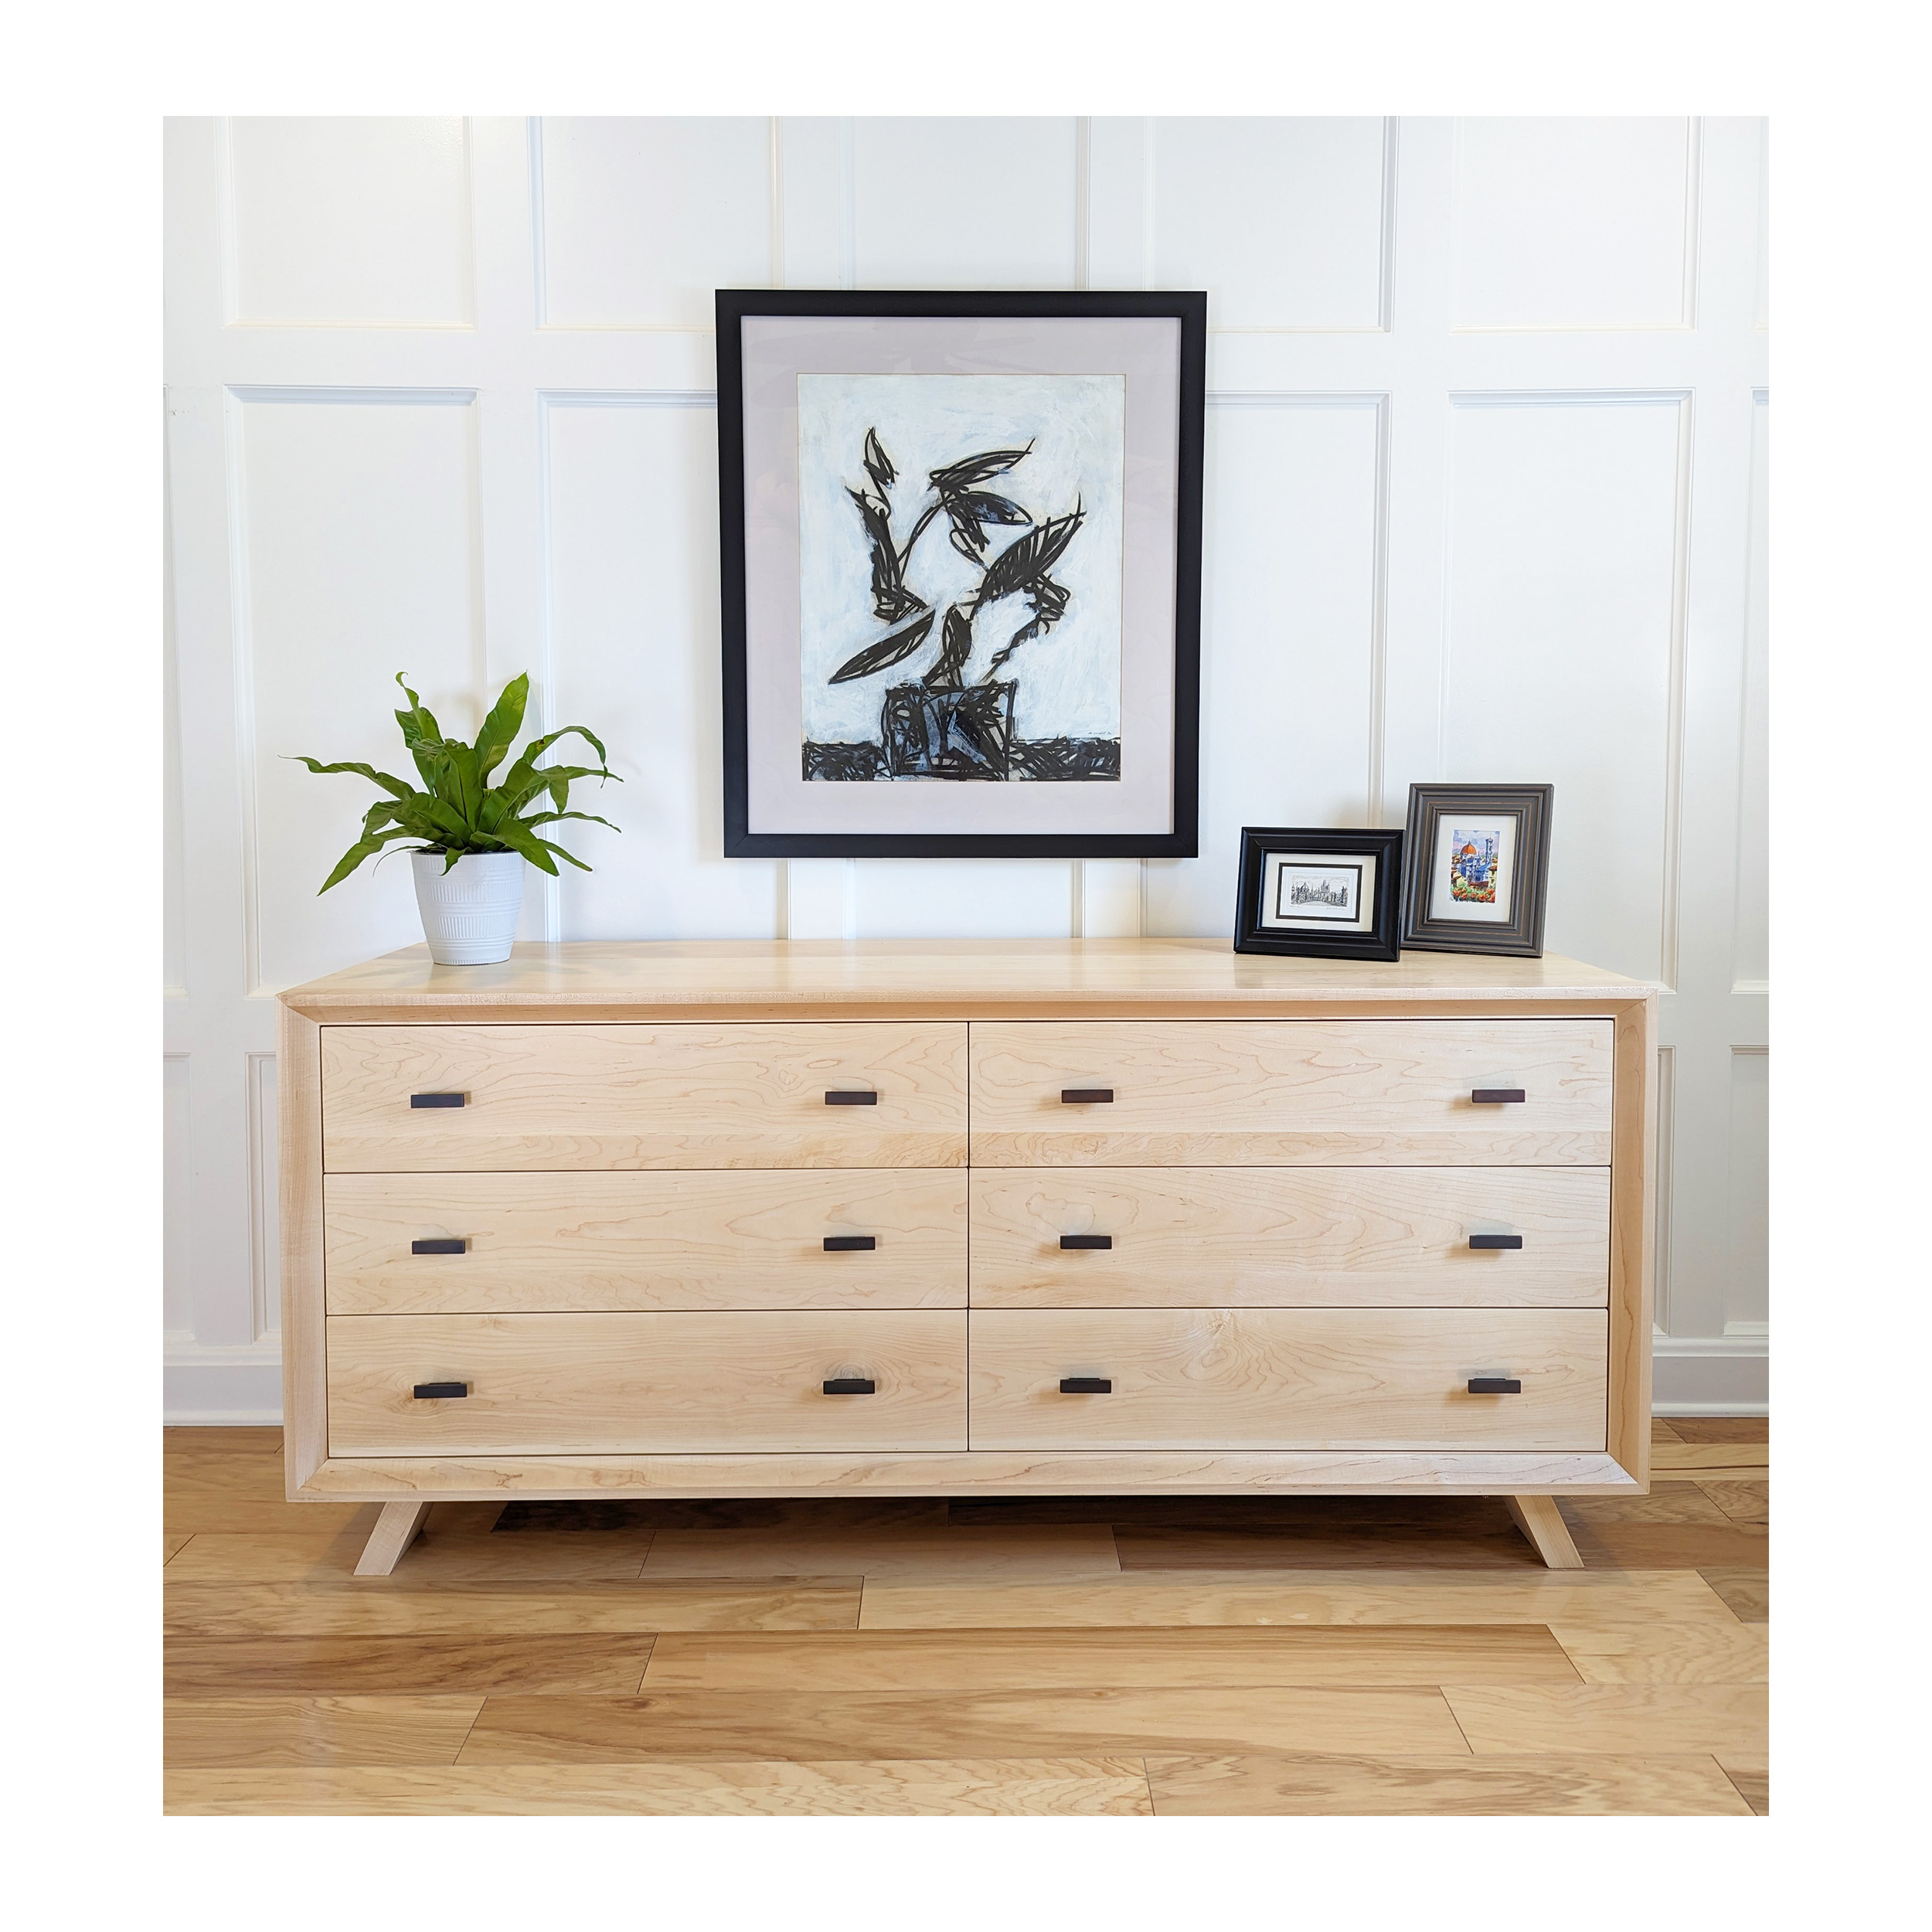 Series 555 Dresser With Six Drawers At 72″ In Width